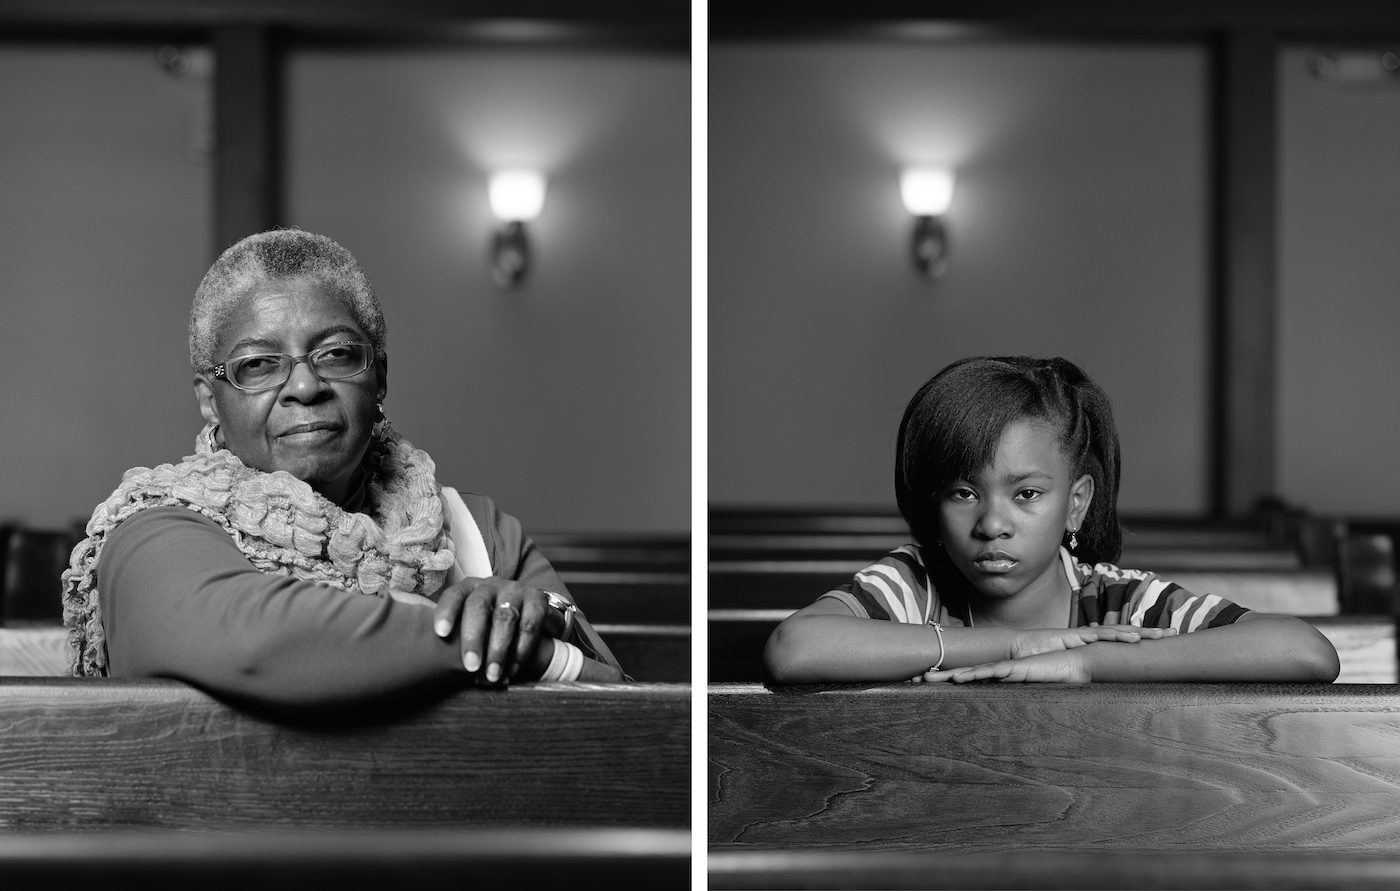 Dawoud Bey, Mary Parker and Caela Cowan, Birmingham, AL, from the series The Birmingham Project, 2012. Rennie Collection, Vancouver,  © Dawoud Bey